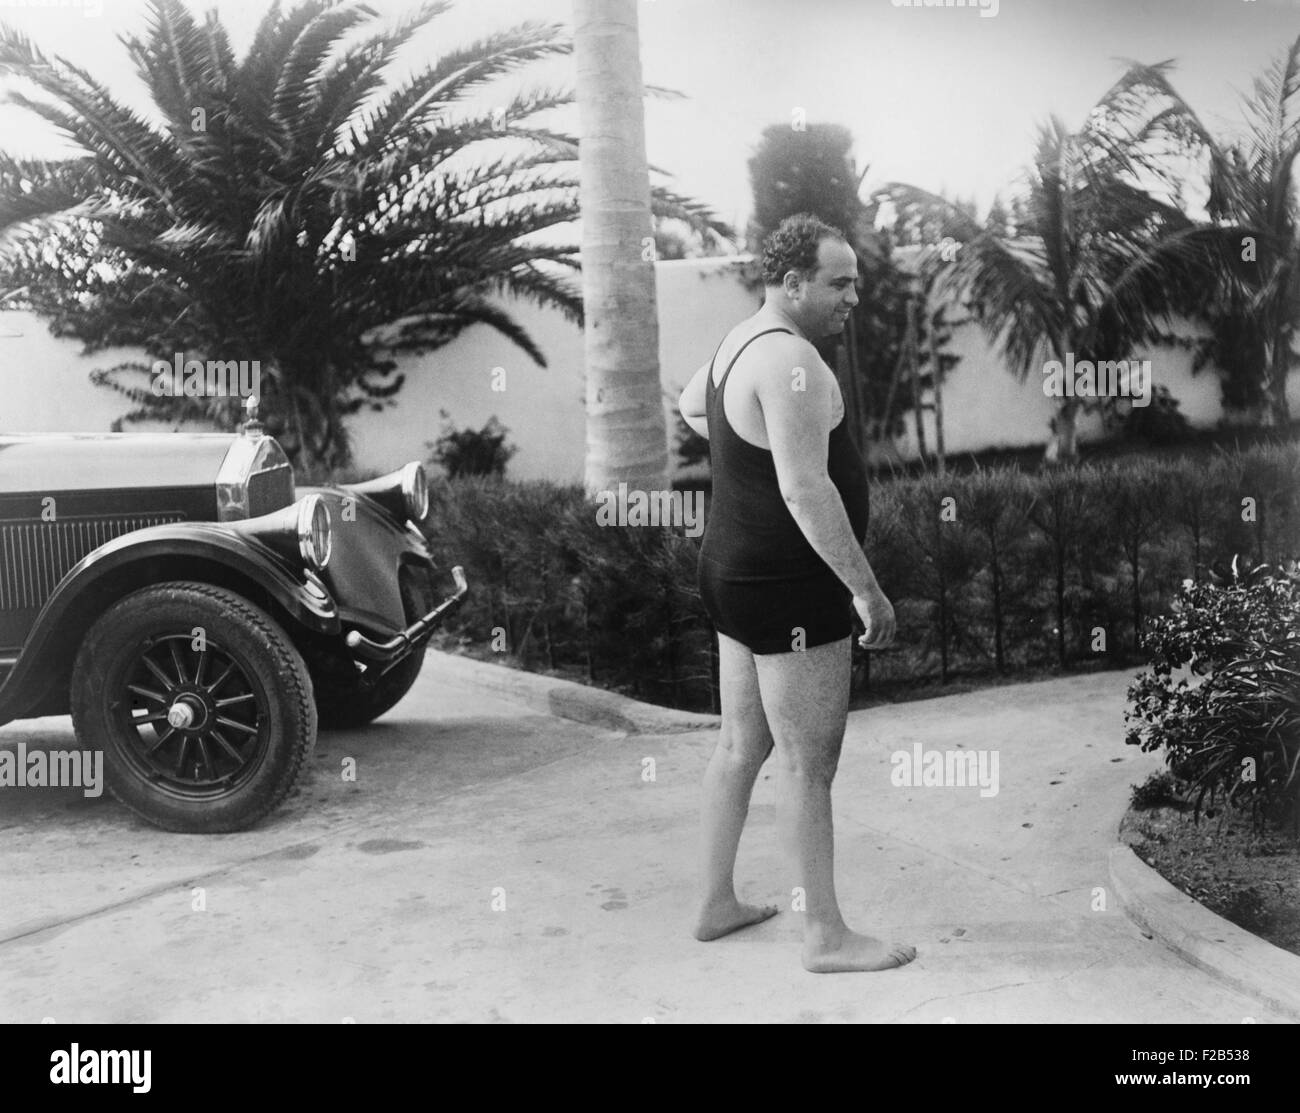 Chicago gangster Al Capone wearing a bathing suit at his Florida home. Ca. 1929-31. - (BSLOC 2015 1 11) Stock Photo